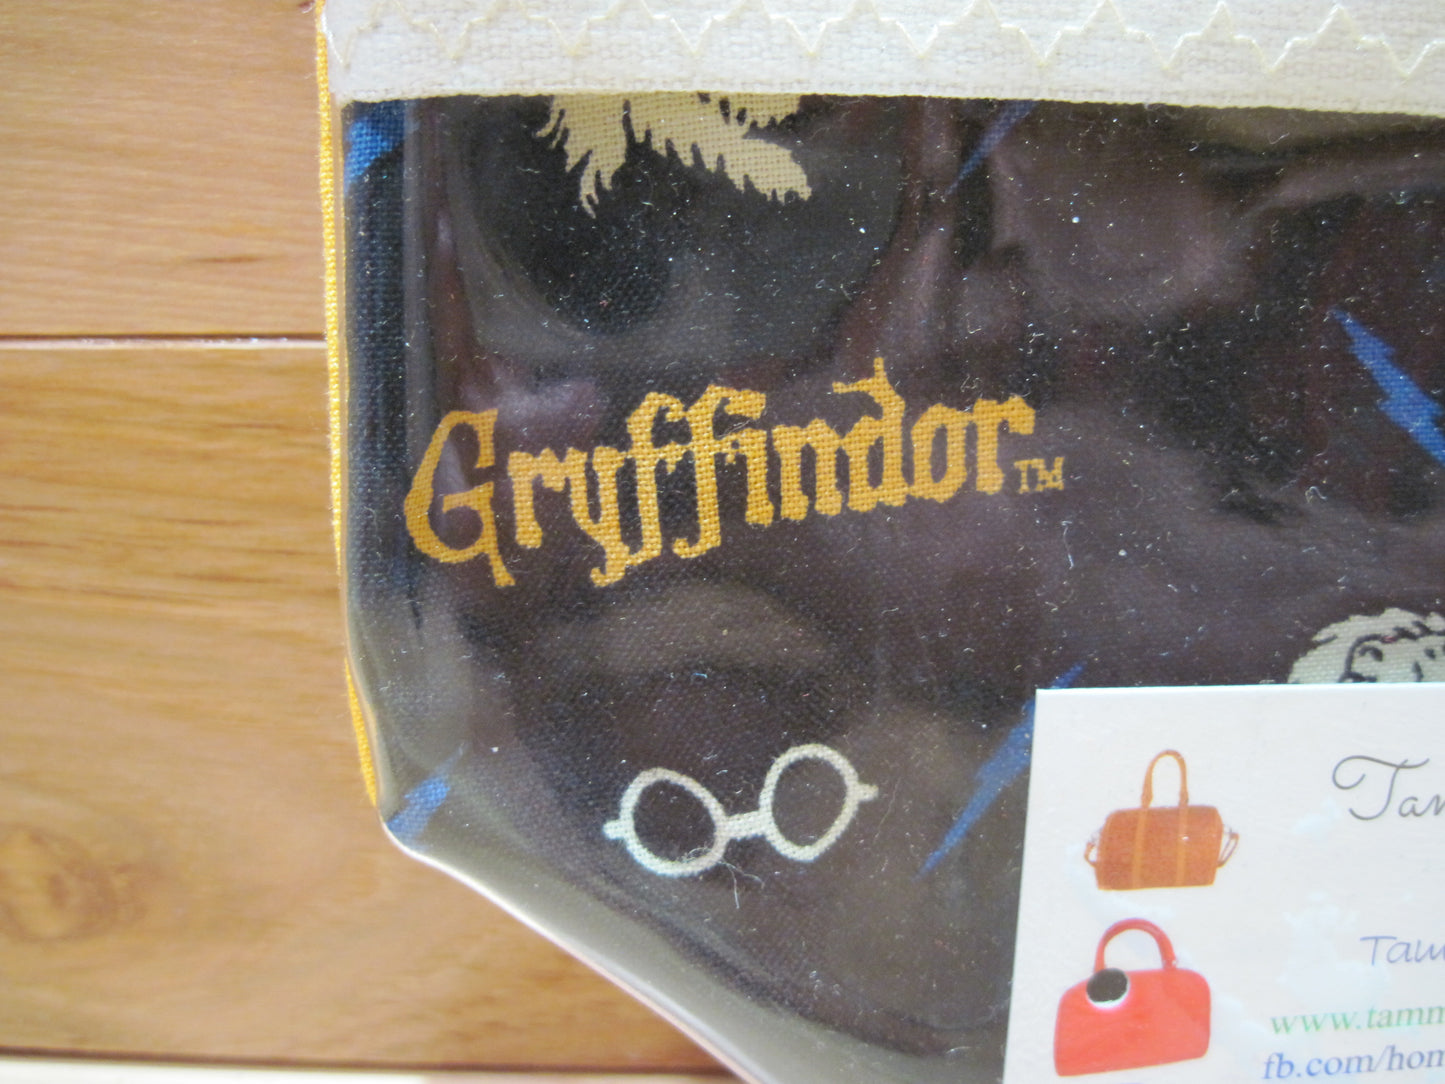 Notions Bag Gryffindor, Harry Potter w/ yellow gold & white zipper